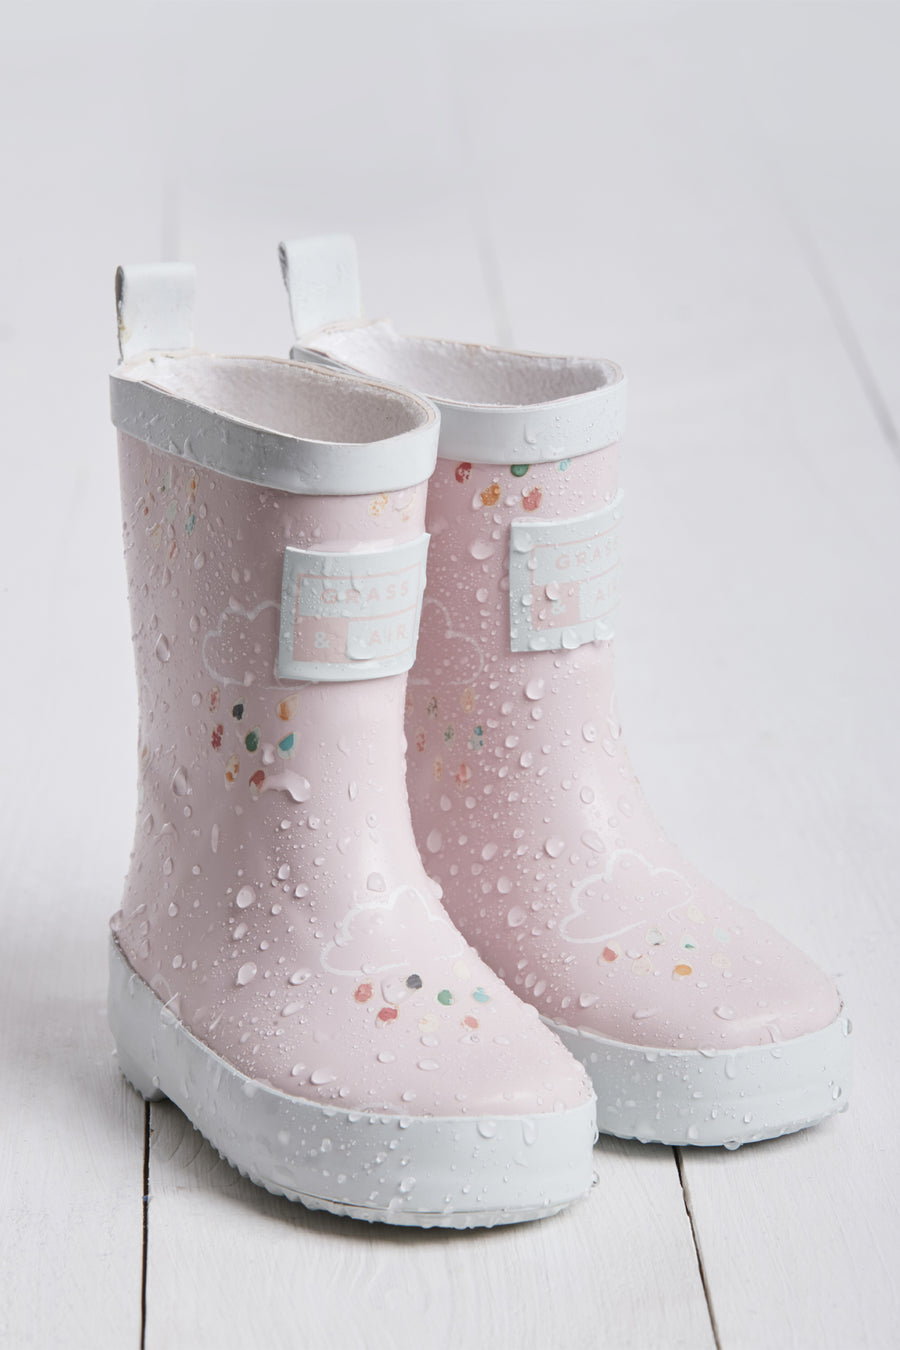 Grass and Air wellies|Infant |Colour Changing|Pale Pink